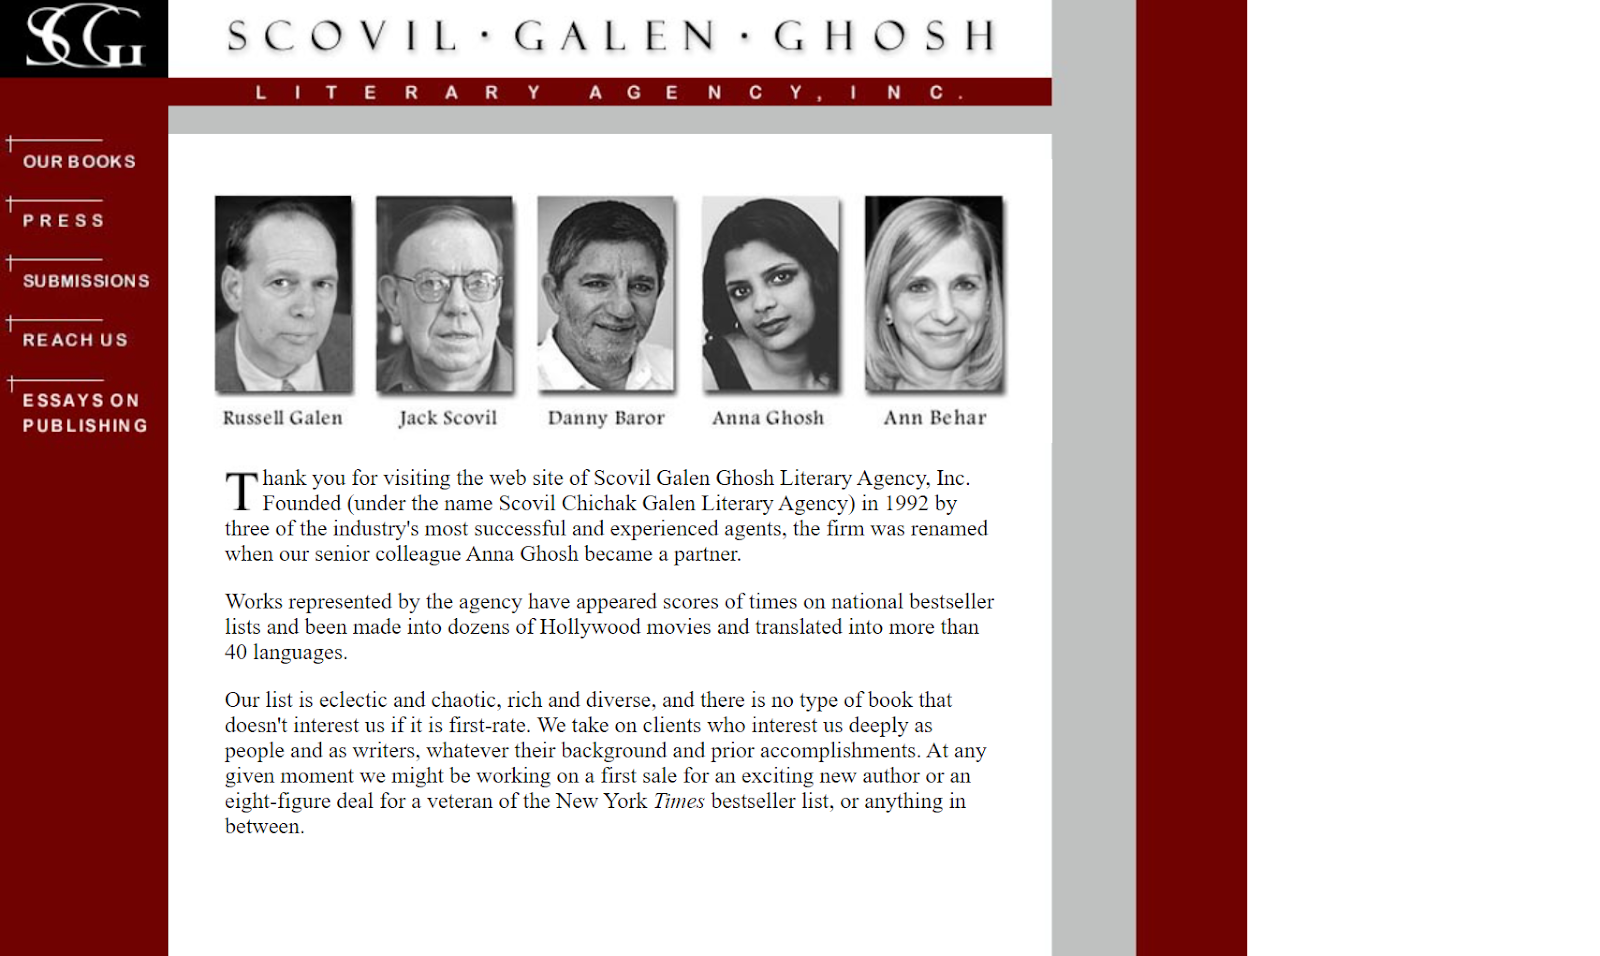 Russell Galen Of Scovil Galen And Ghosh Literary Agency